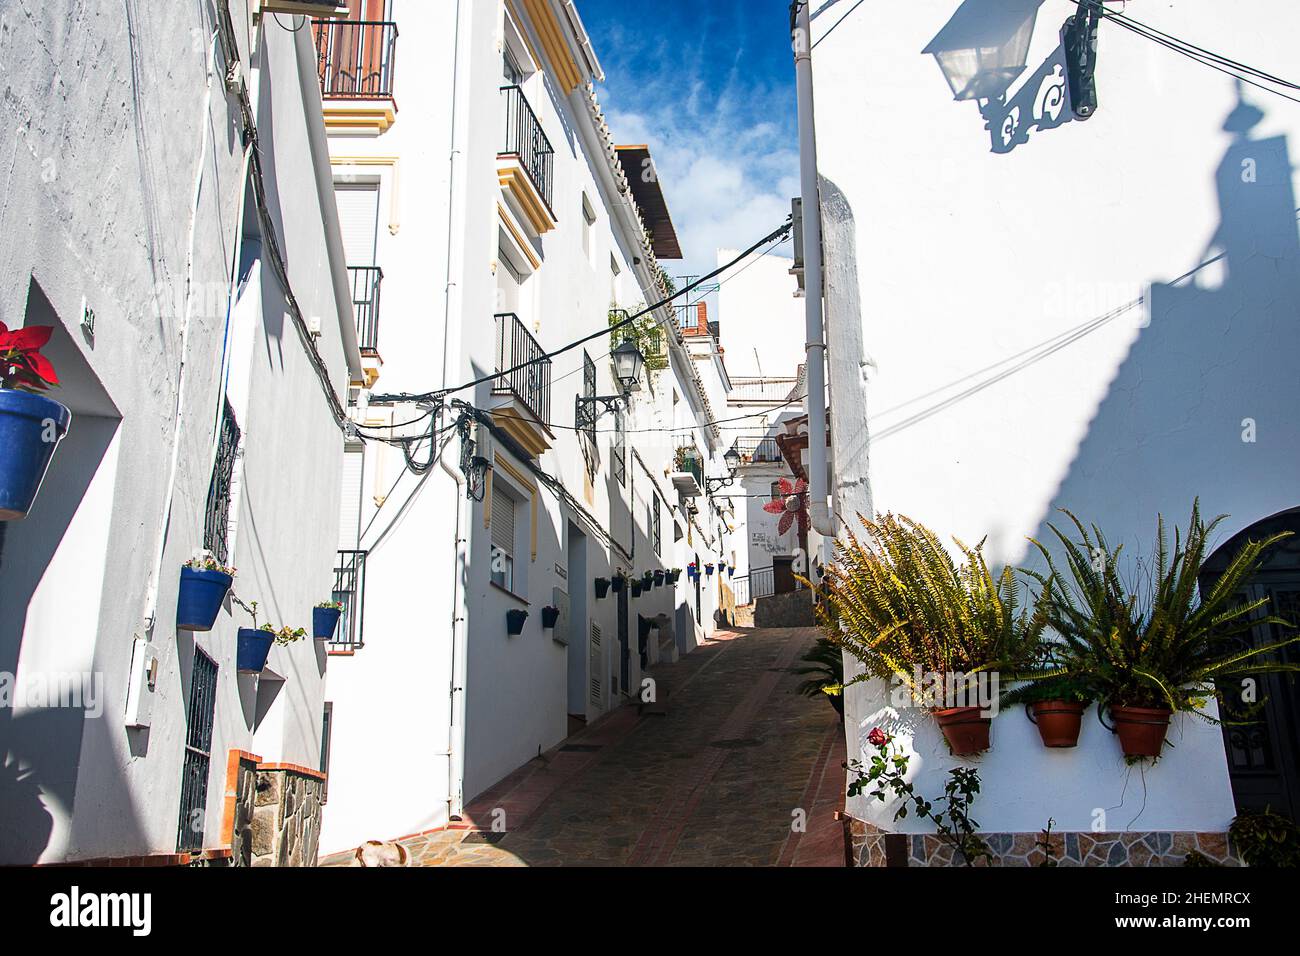 Canillas de Albaida is a town in the province of Málaga,Spain. It forms  part of the “Sun and Wine Route” in the Axarquía region Stock Photo - Alamy